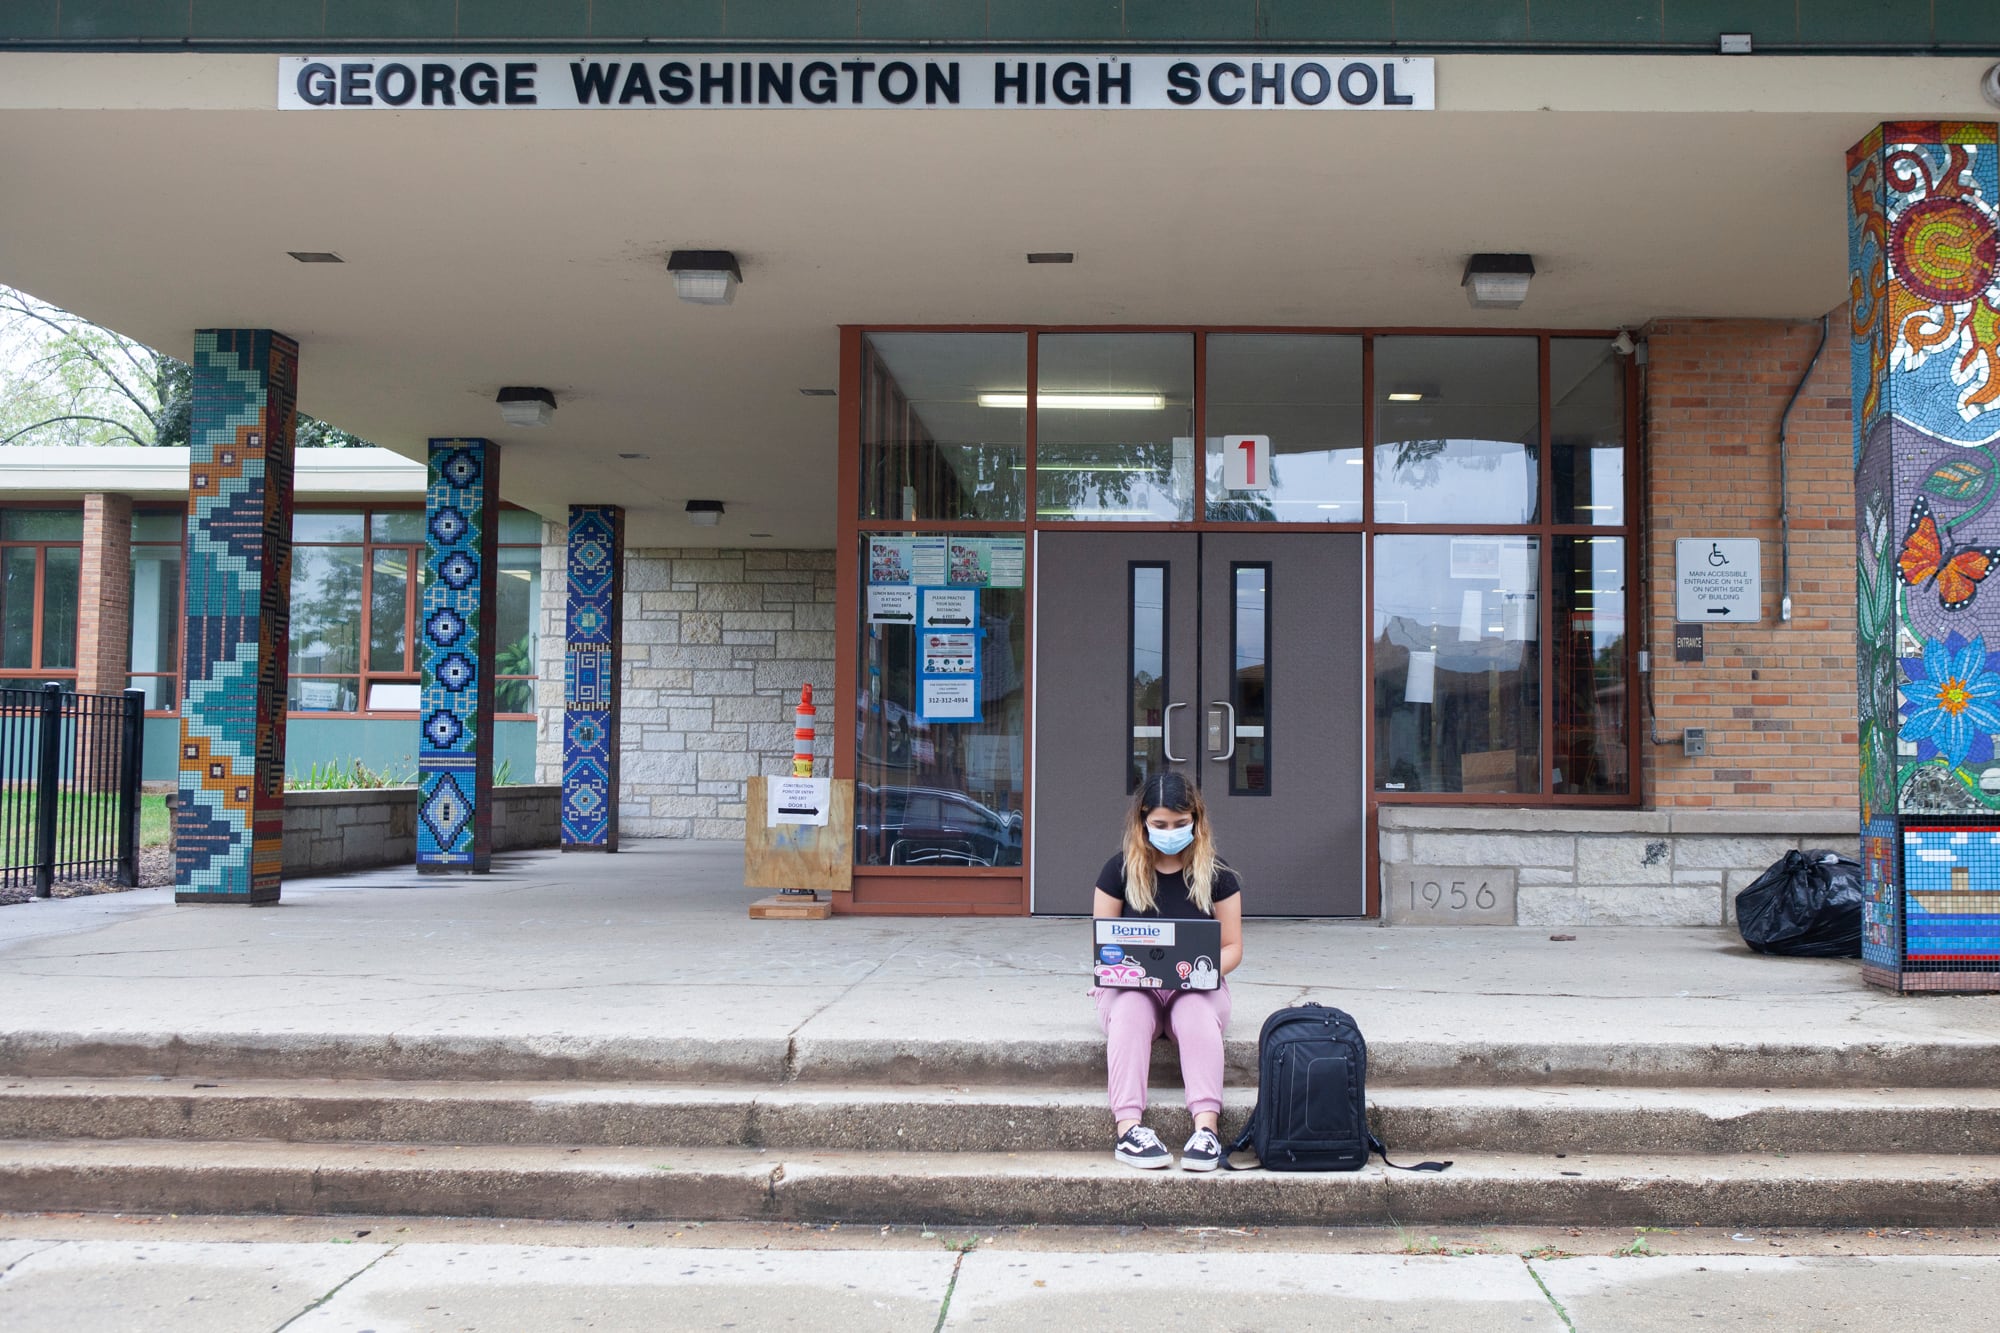 Trinity sitting on steps outside of school with her backpack and laptop.